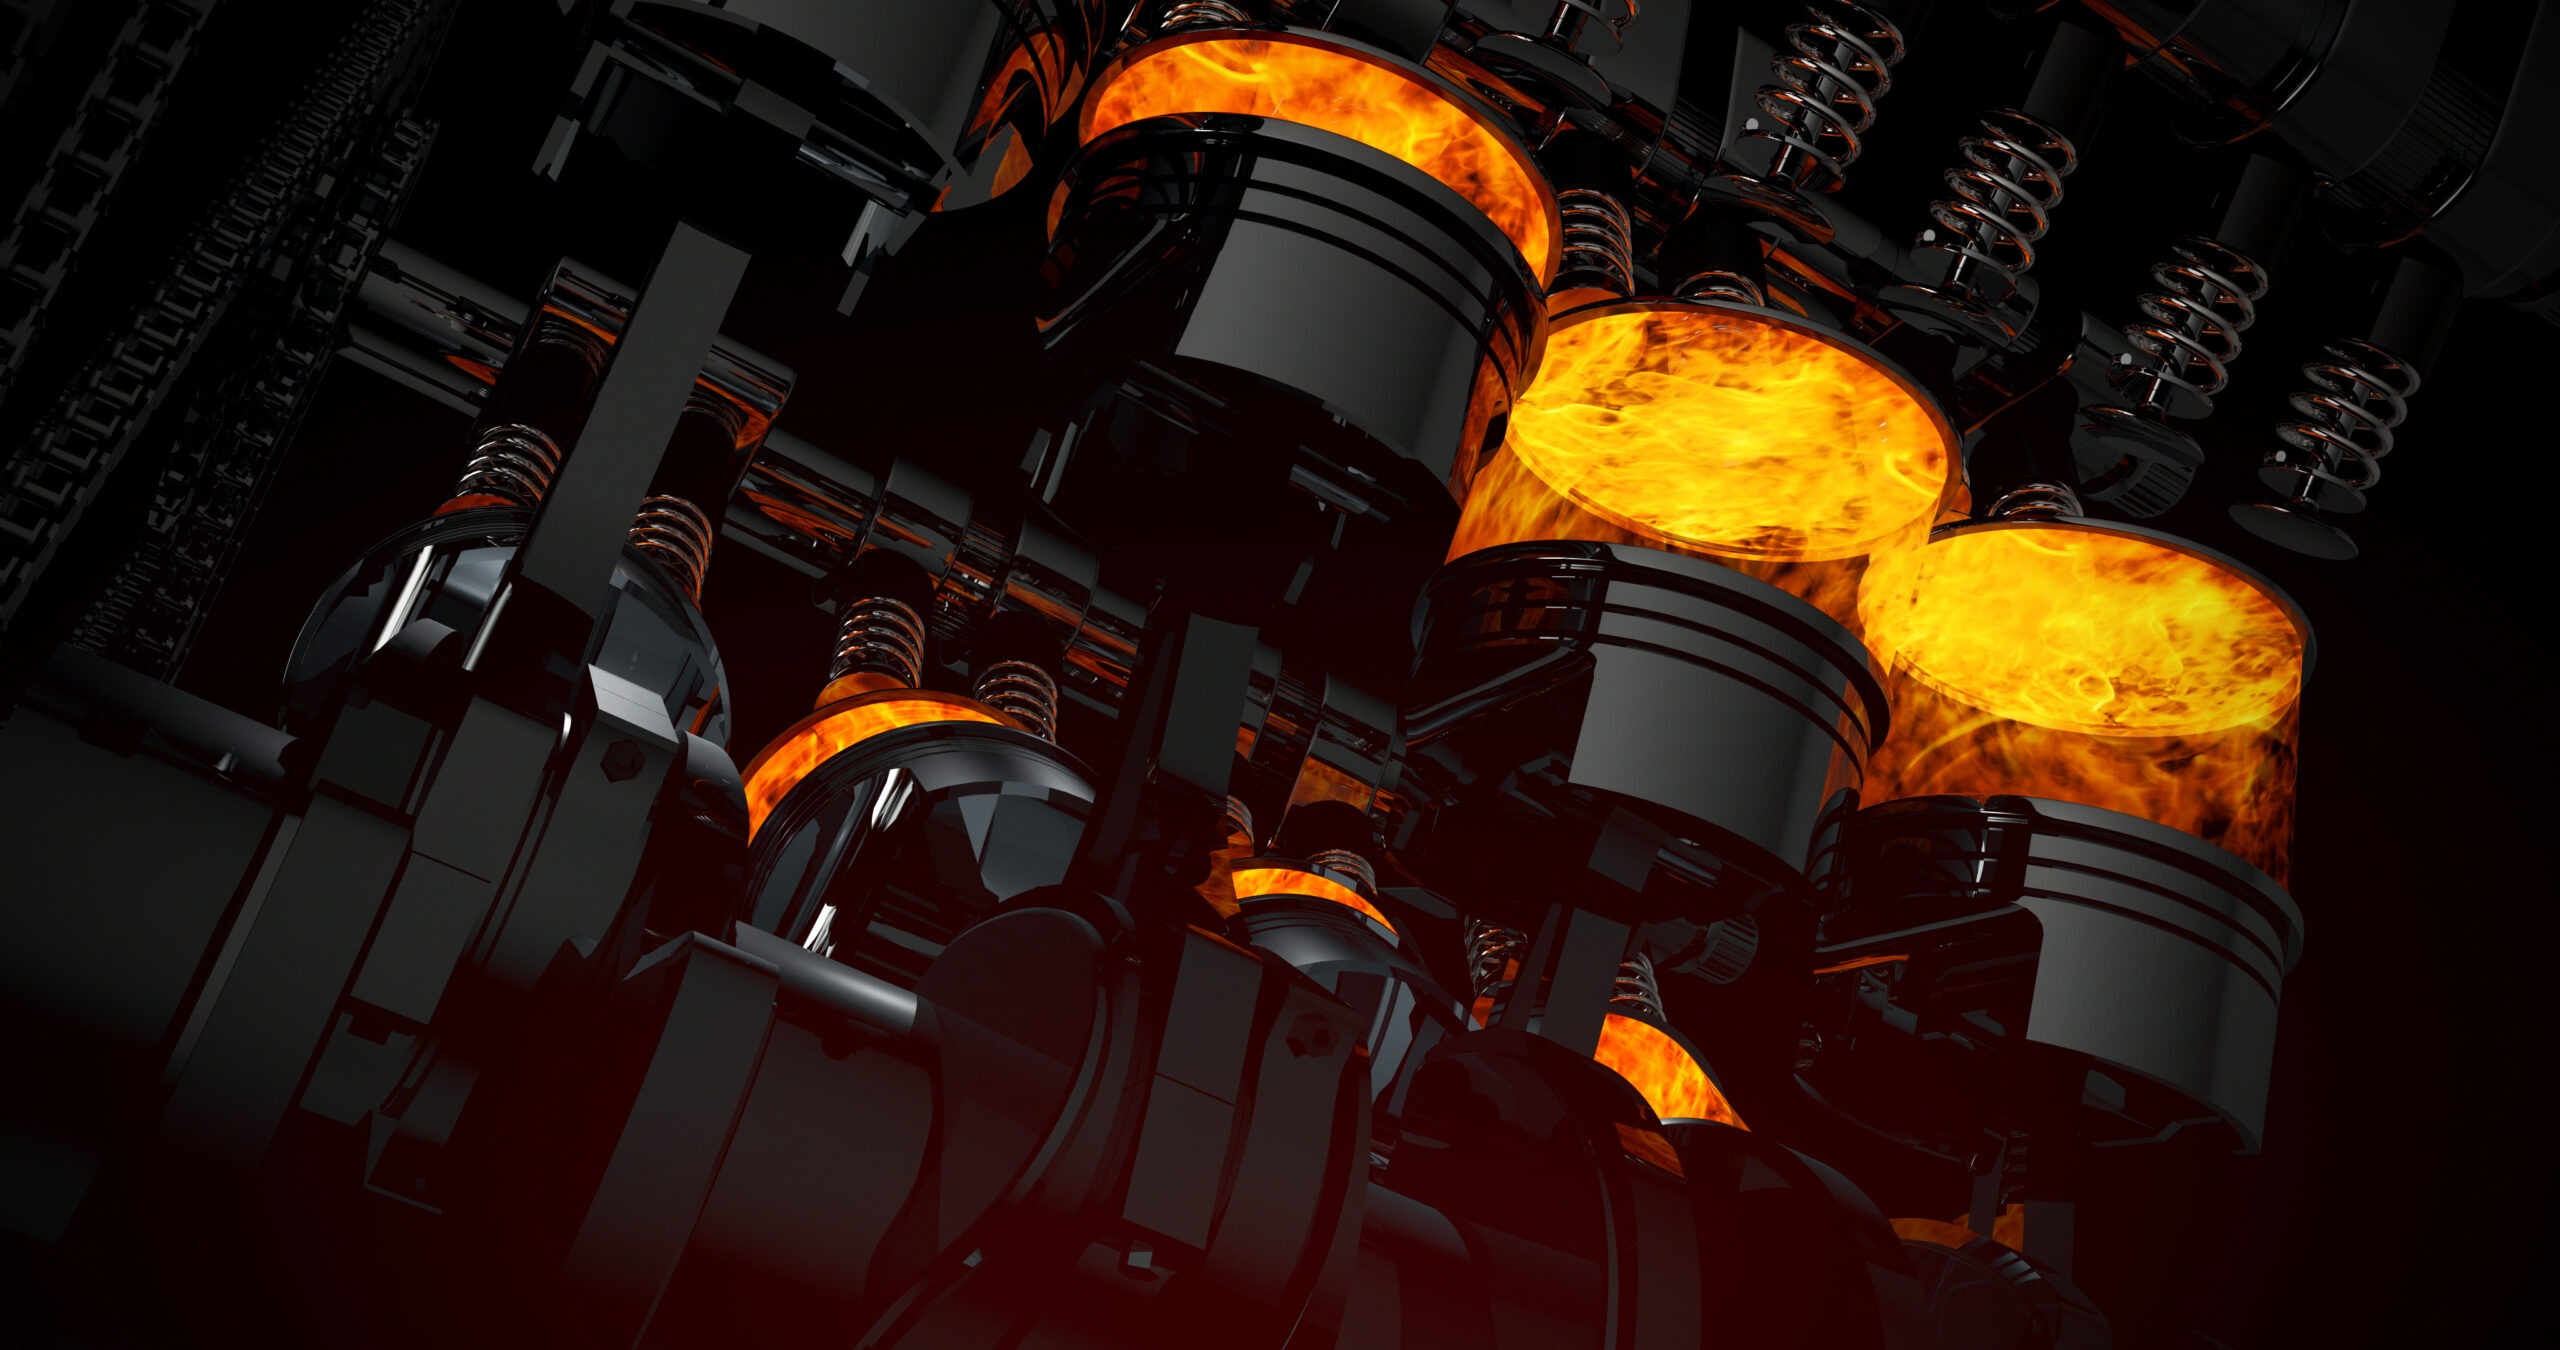 Close Up V8 Engine With Sparks, Explosions And Flames.